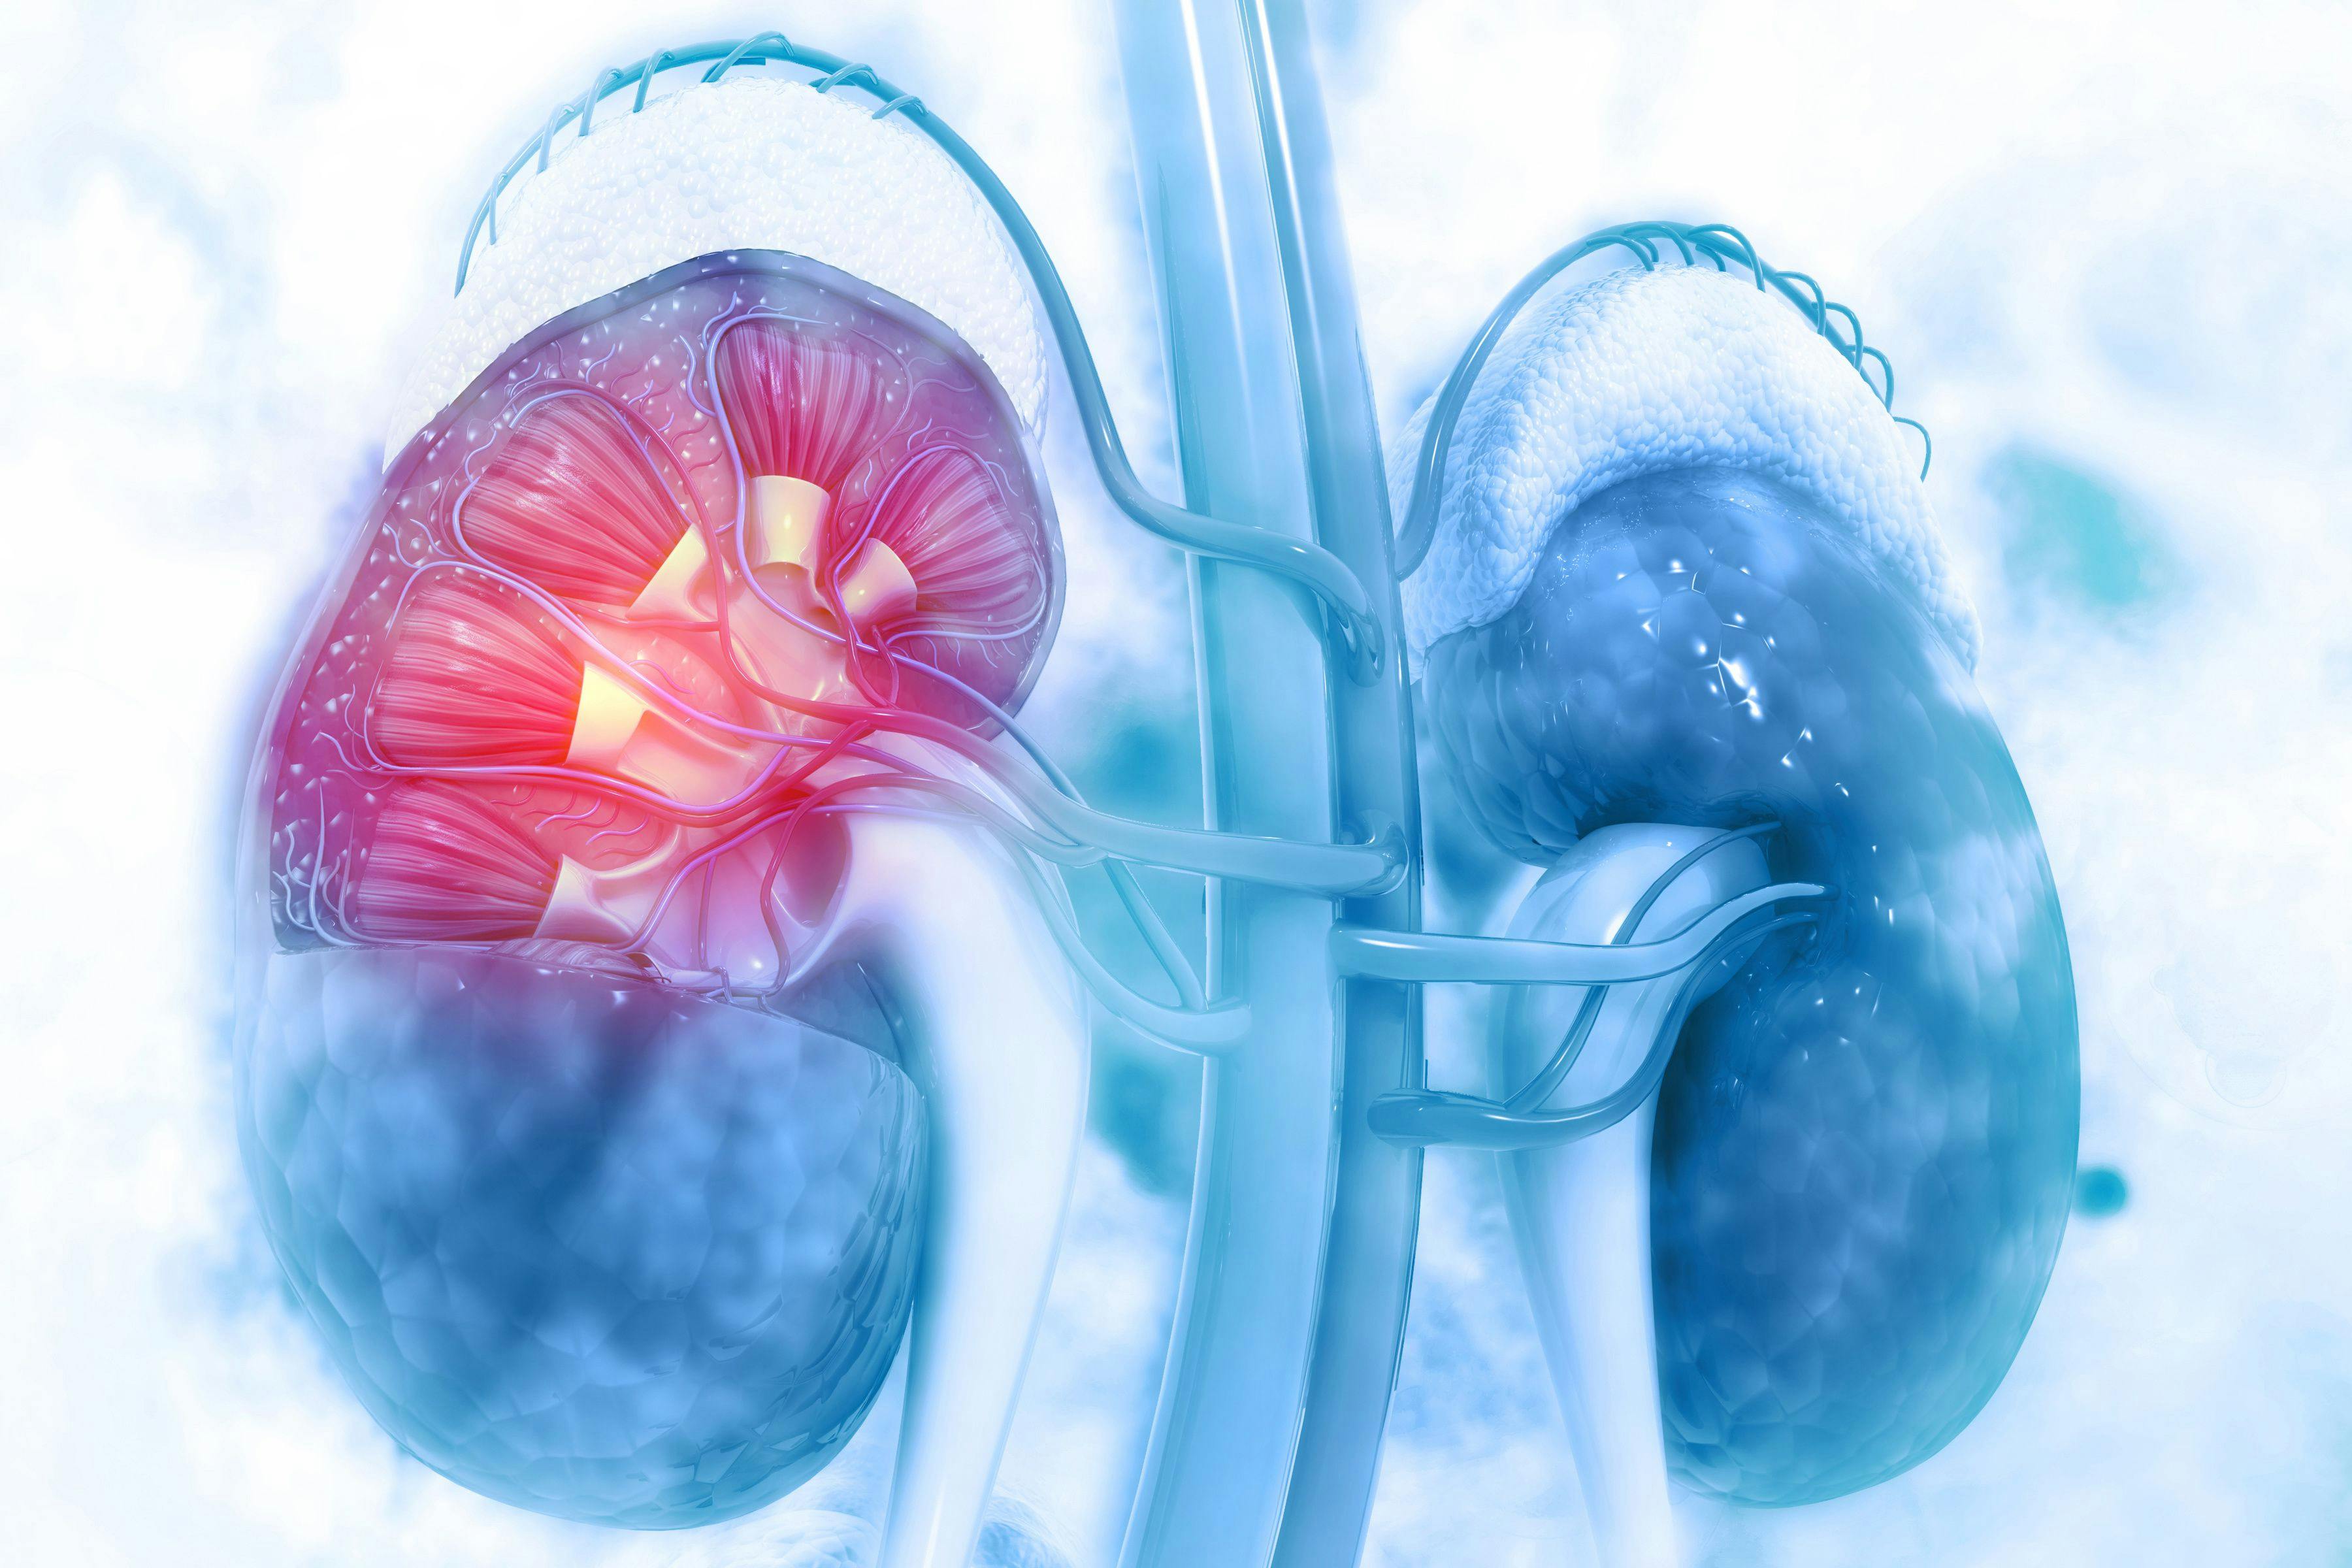 Cabometyx Significantly Prolongs Survival Over Sutent in Rare Form of Kidney Cancer